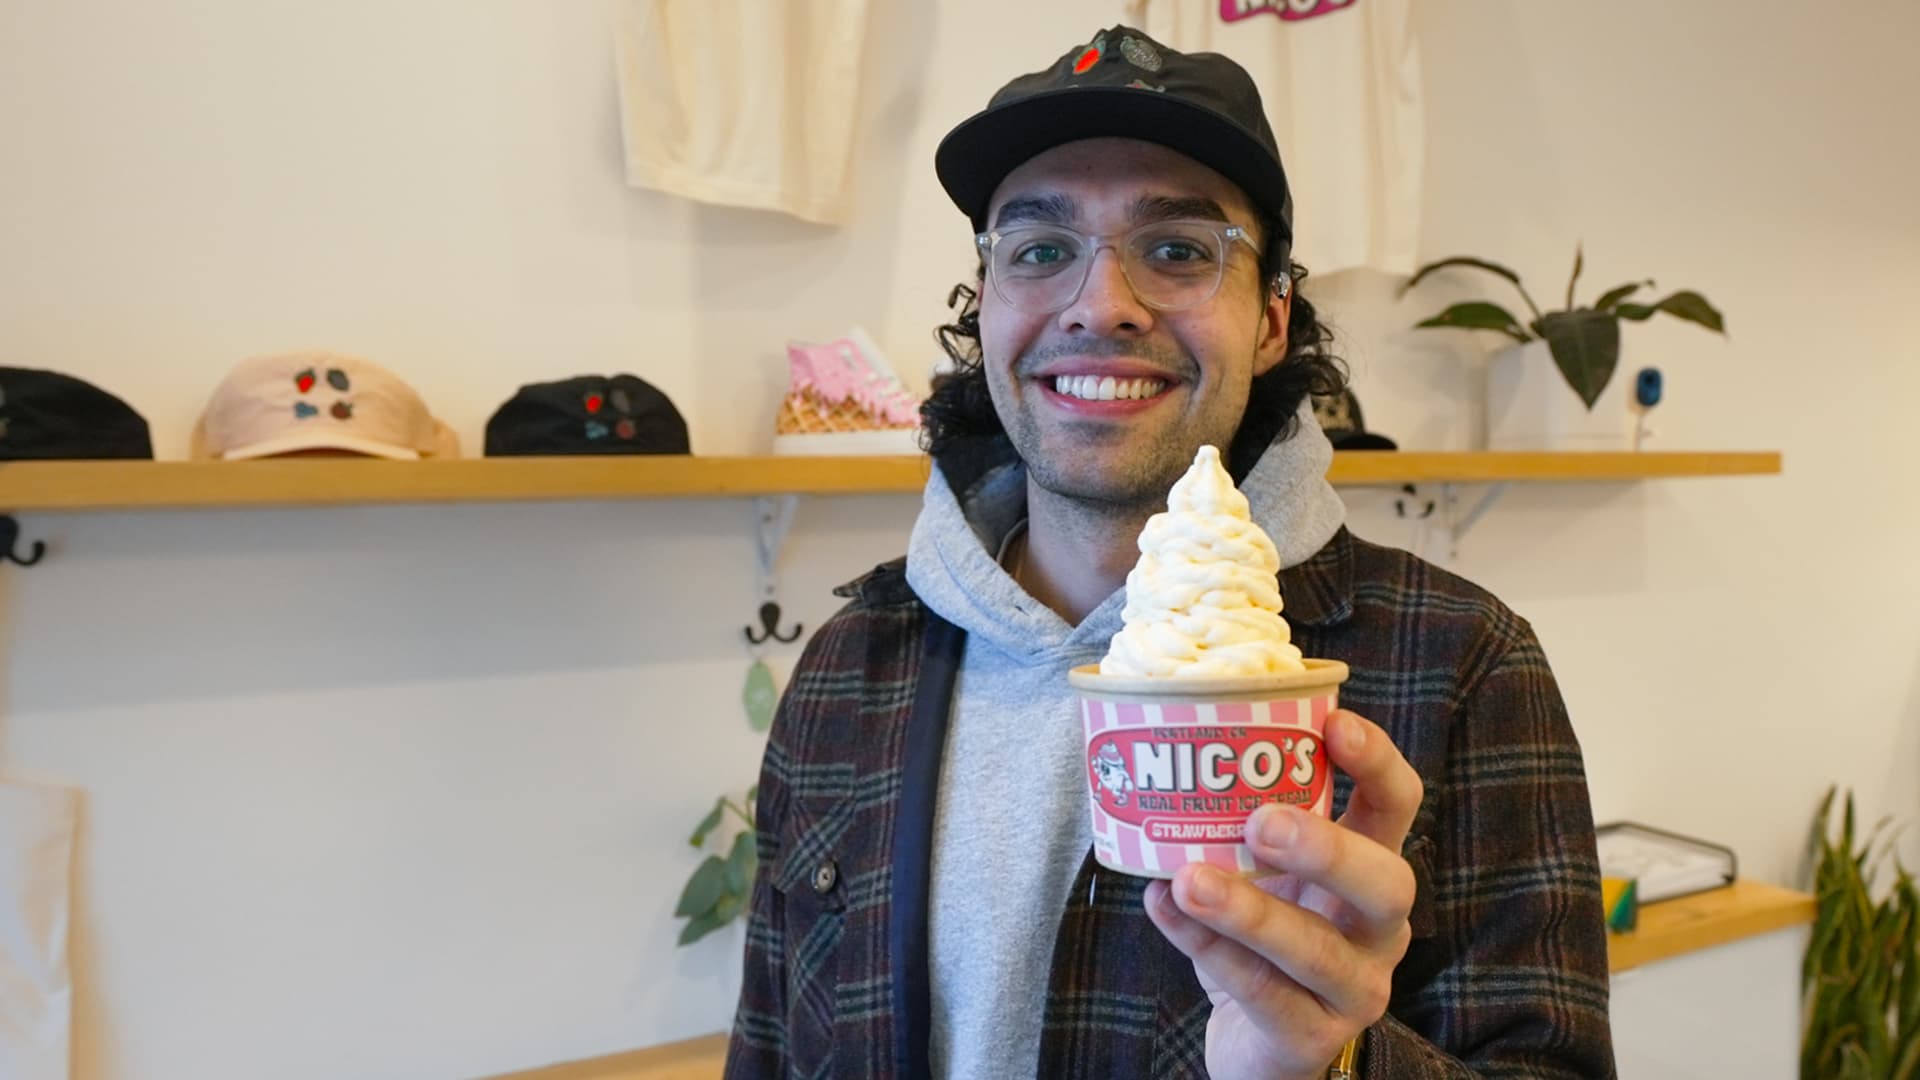 How I turned my love of 'real fruit' ice cream into $650K in sales